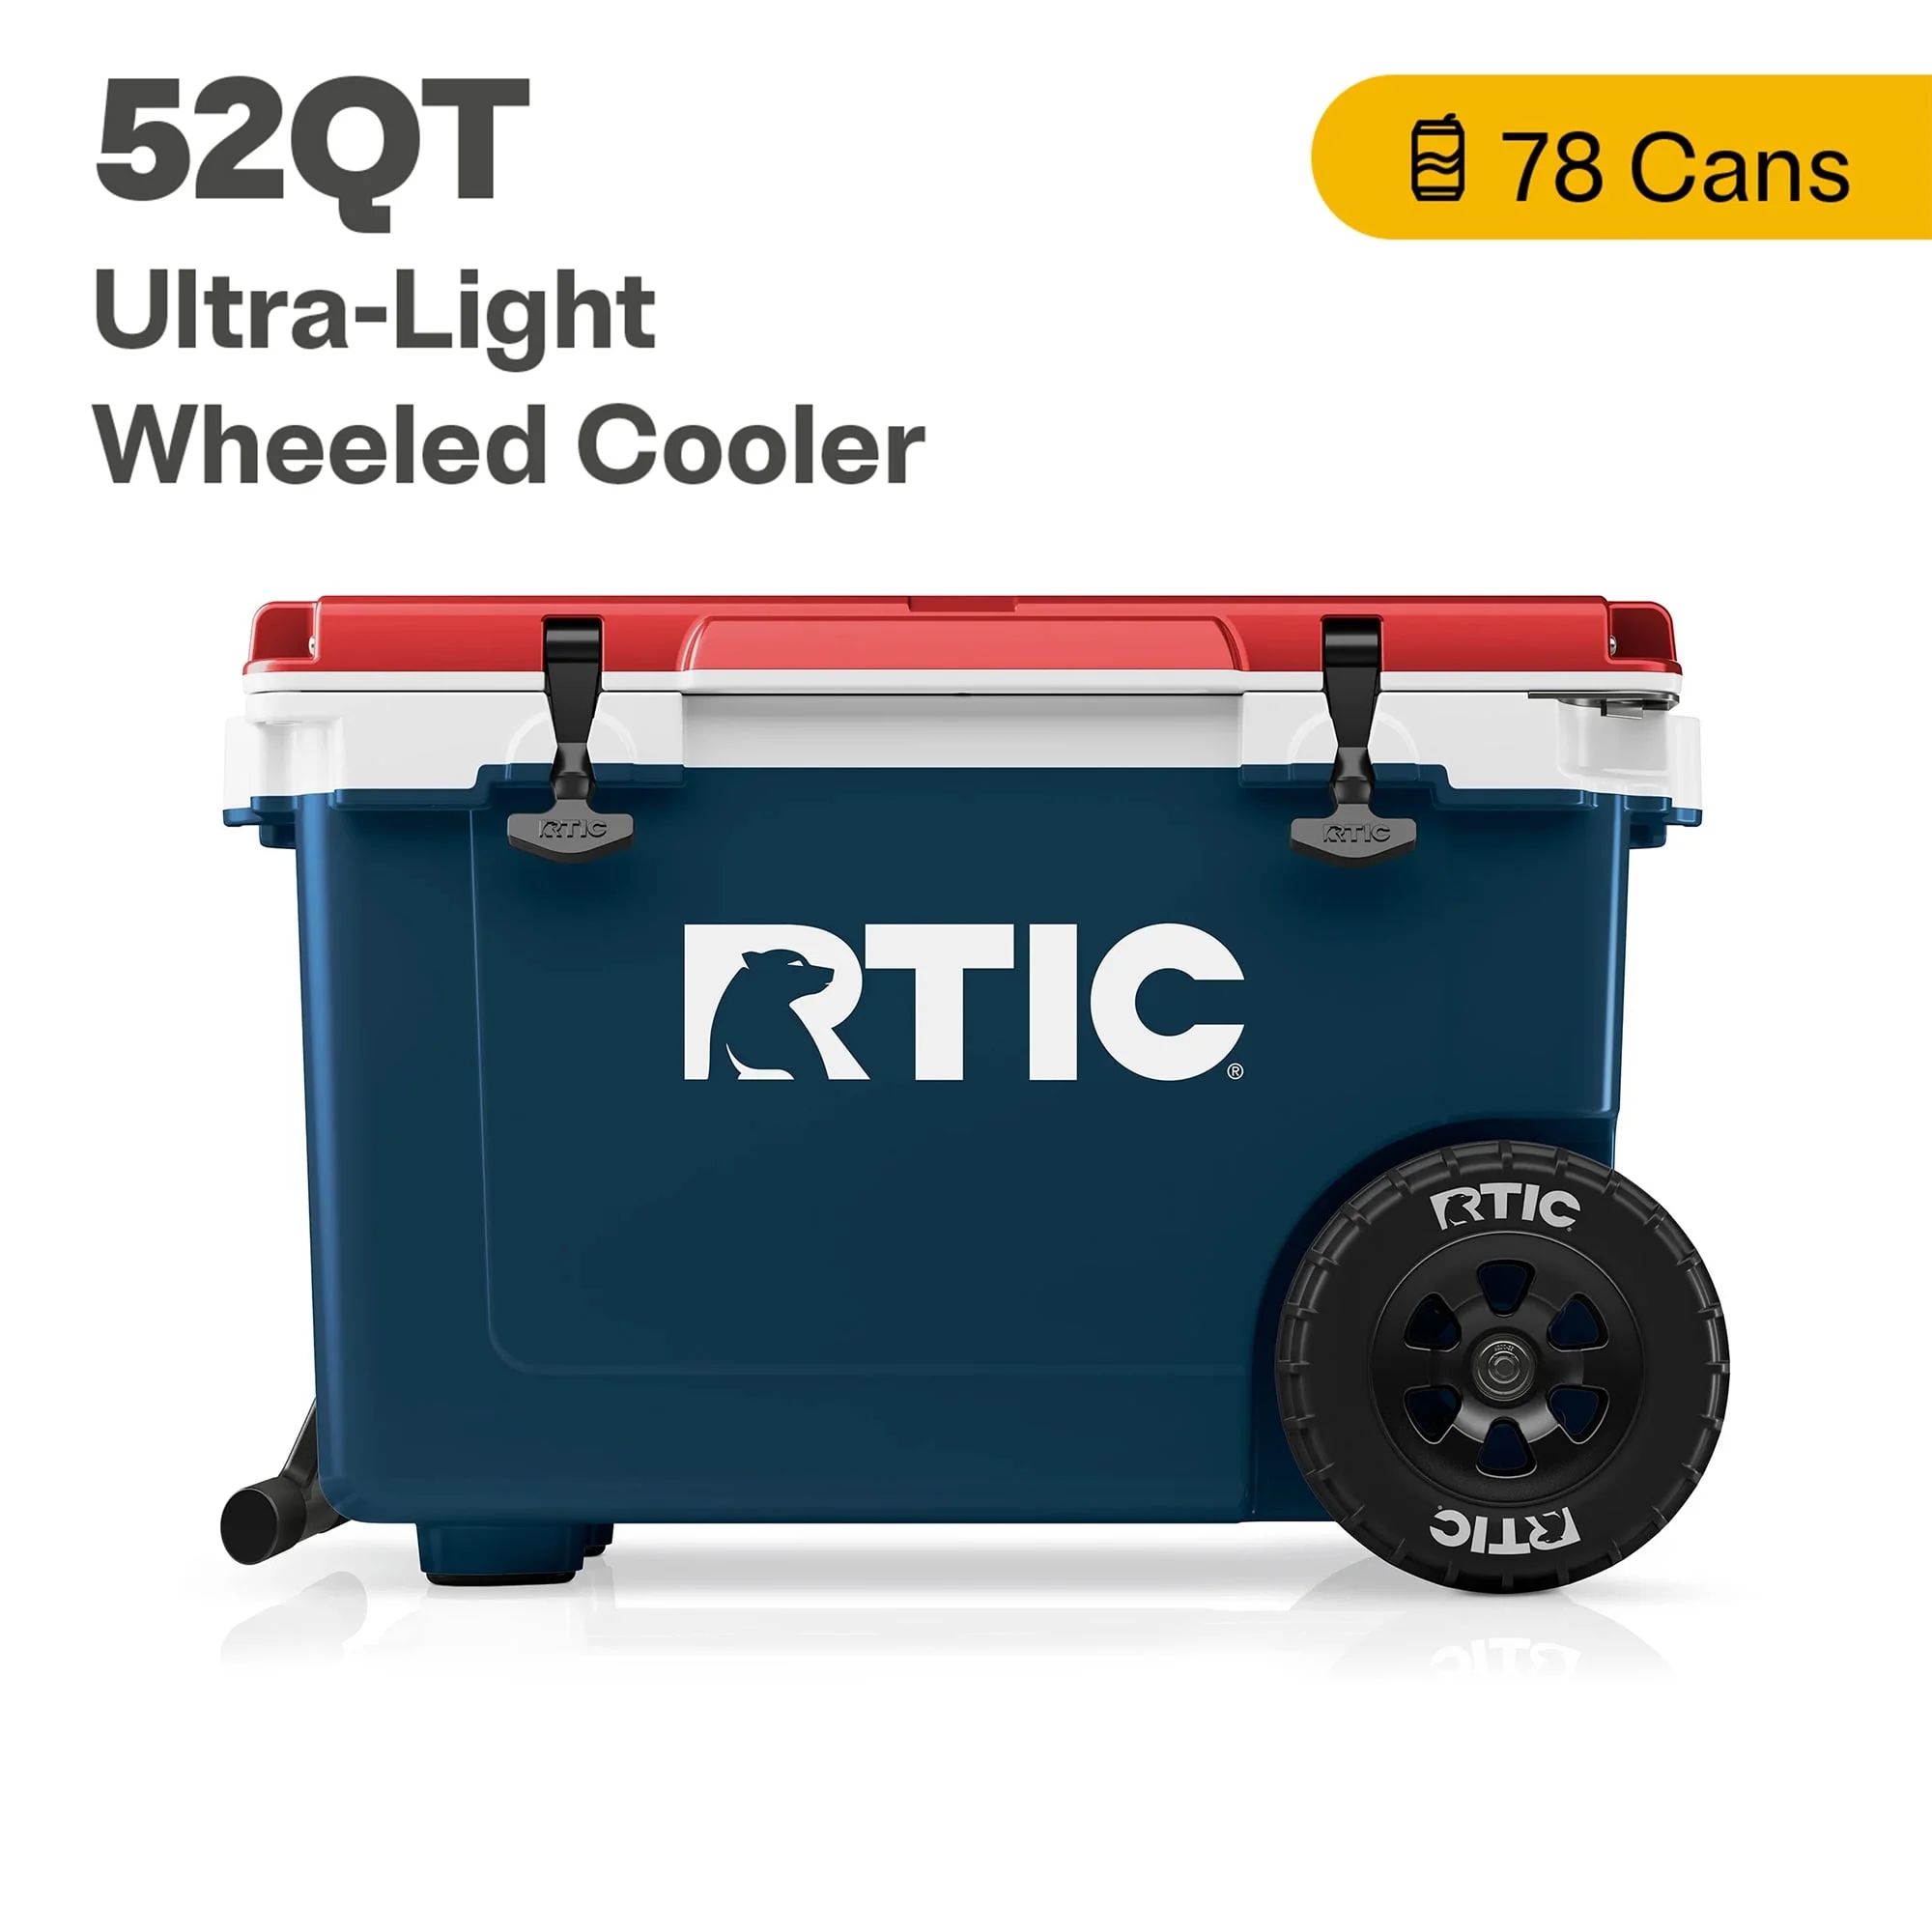 RTIC 52 QT Ultra-Light Wheeled Hard-Sided Ice Chest Cooler, Patriot, Fits 78 Cans | Walmart (US)